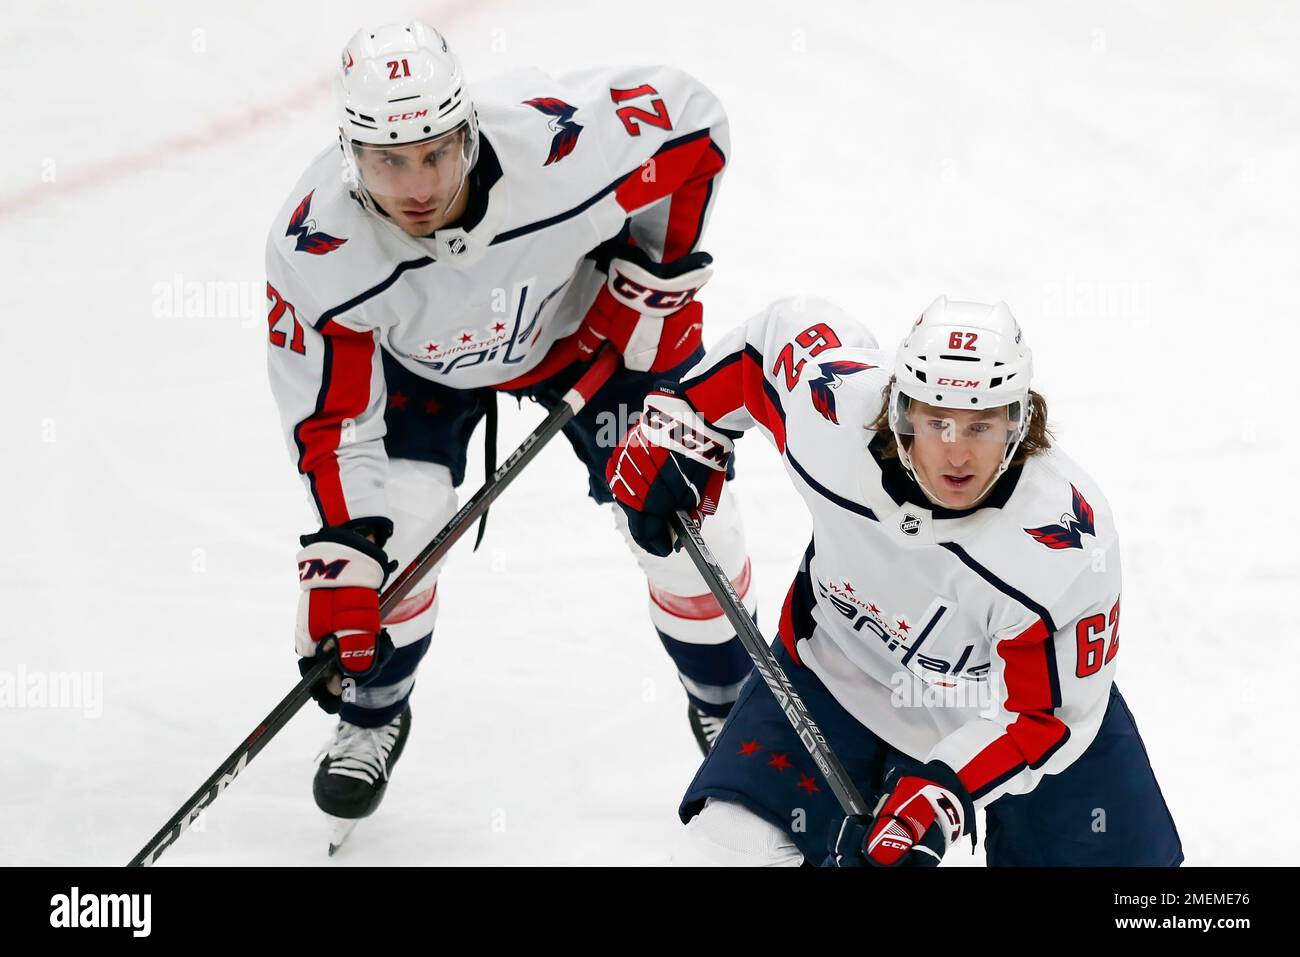 Capitals' Hagelin Out Of Non-Contact Jersey At Informal Skates